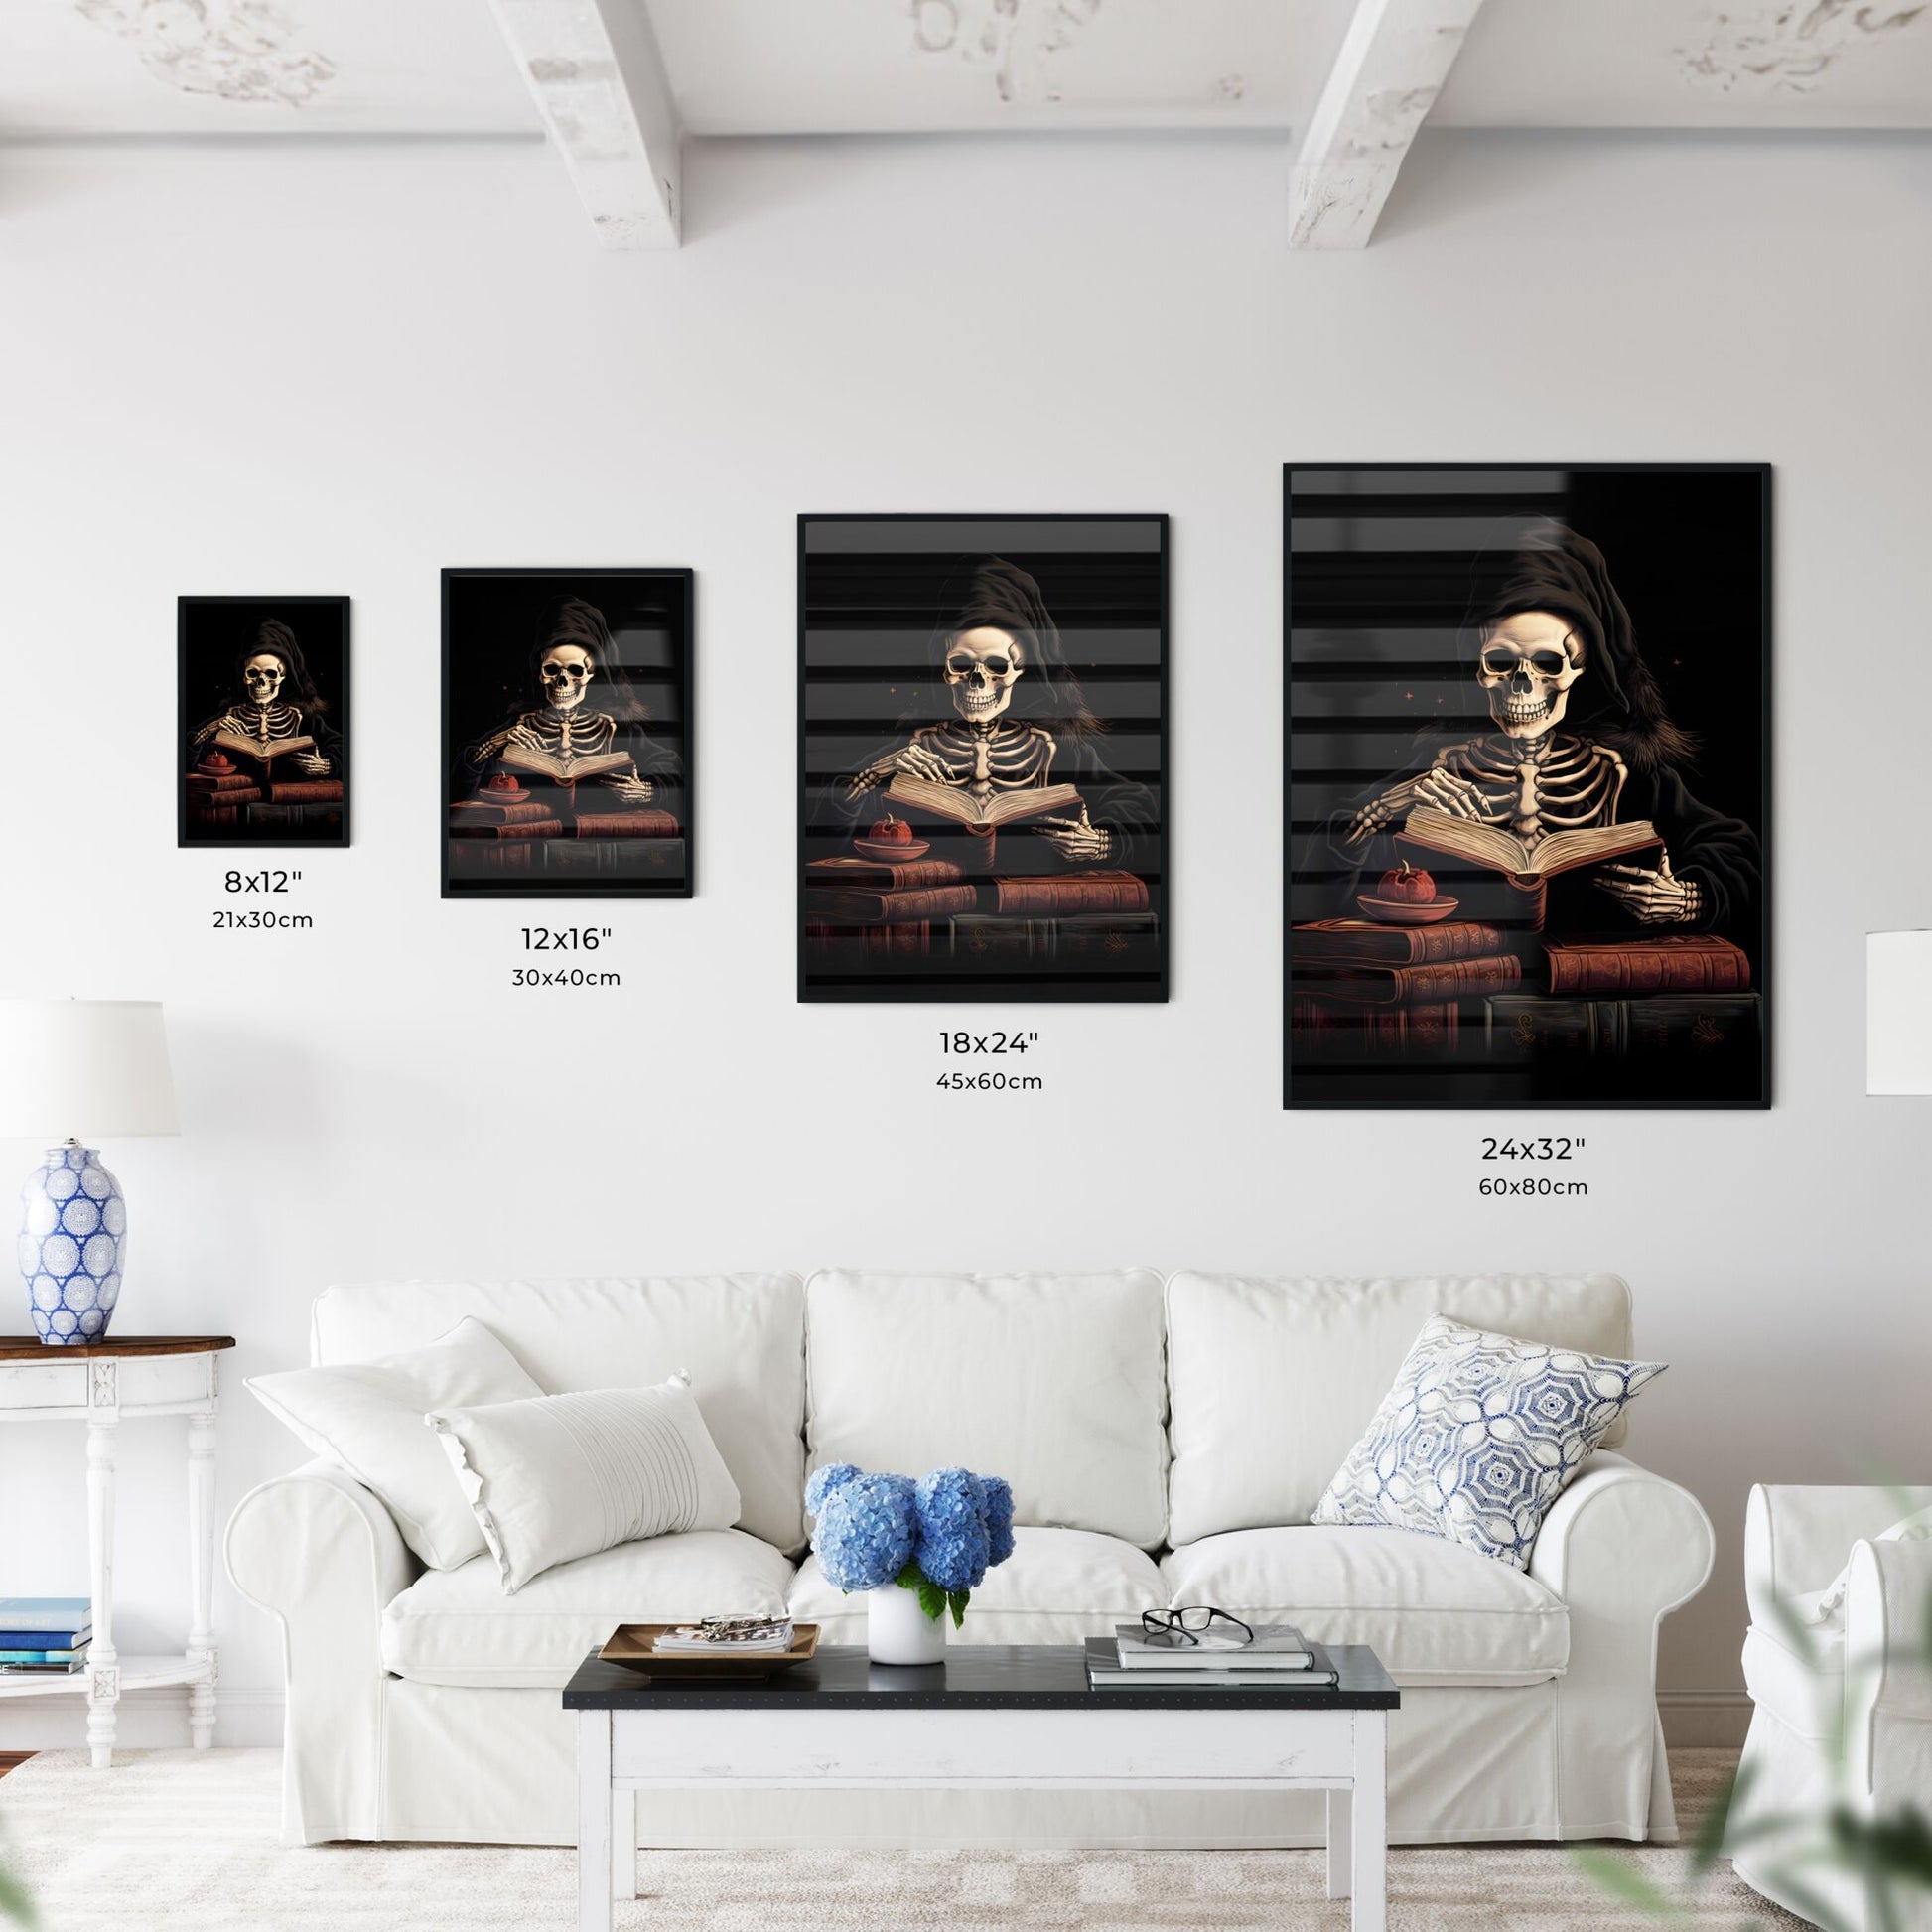 Skeleton Wearing A Hood And Holding A Book Art Print Default Title